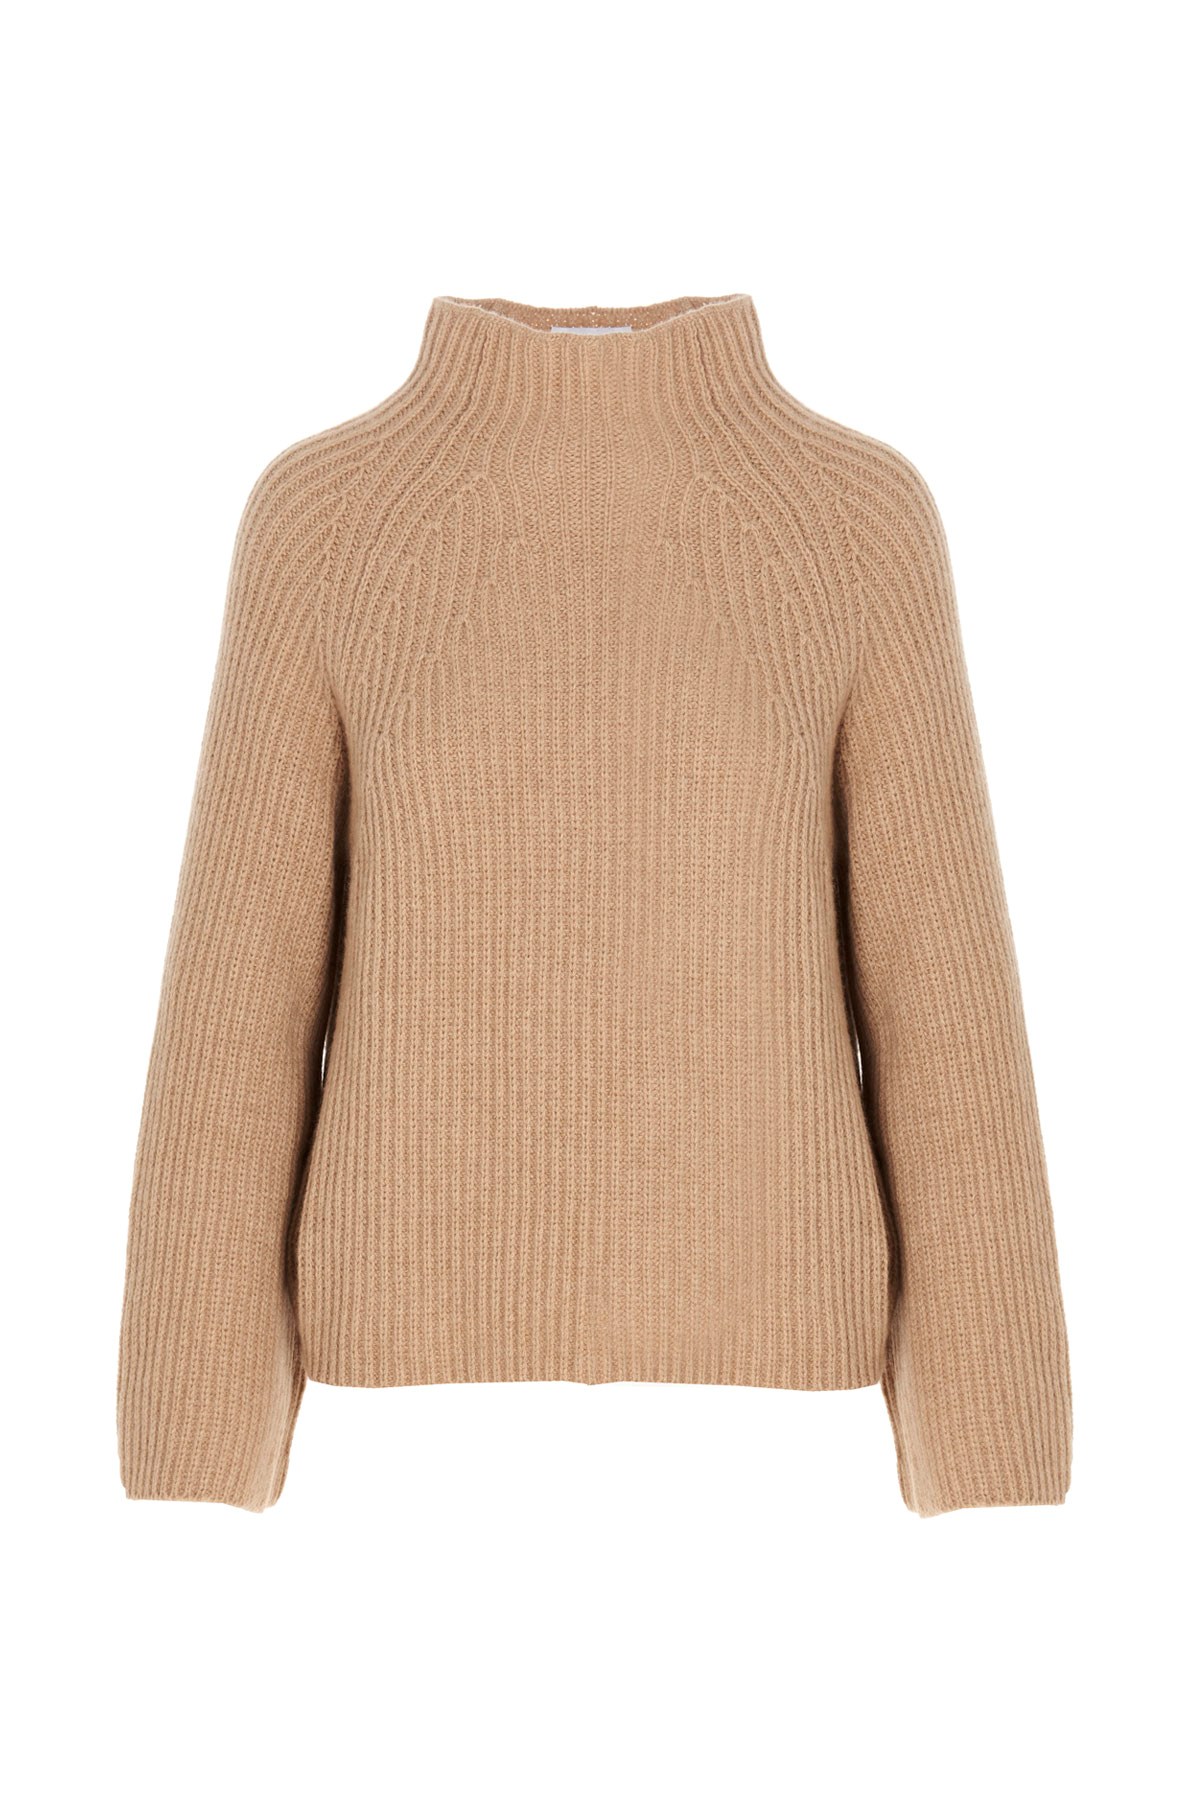 KNIIT MILANO Pullover 'Turner Eco'